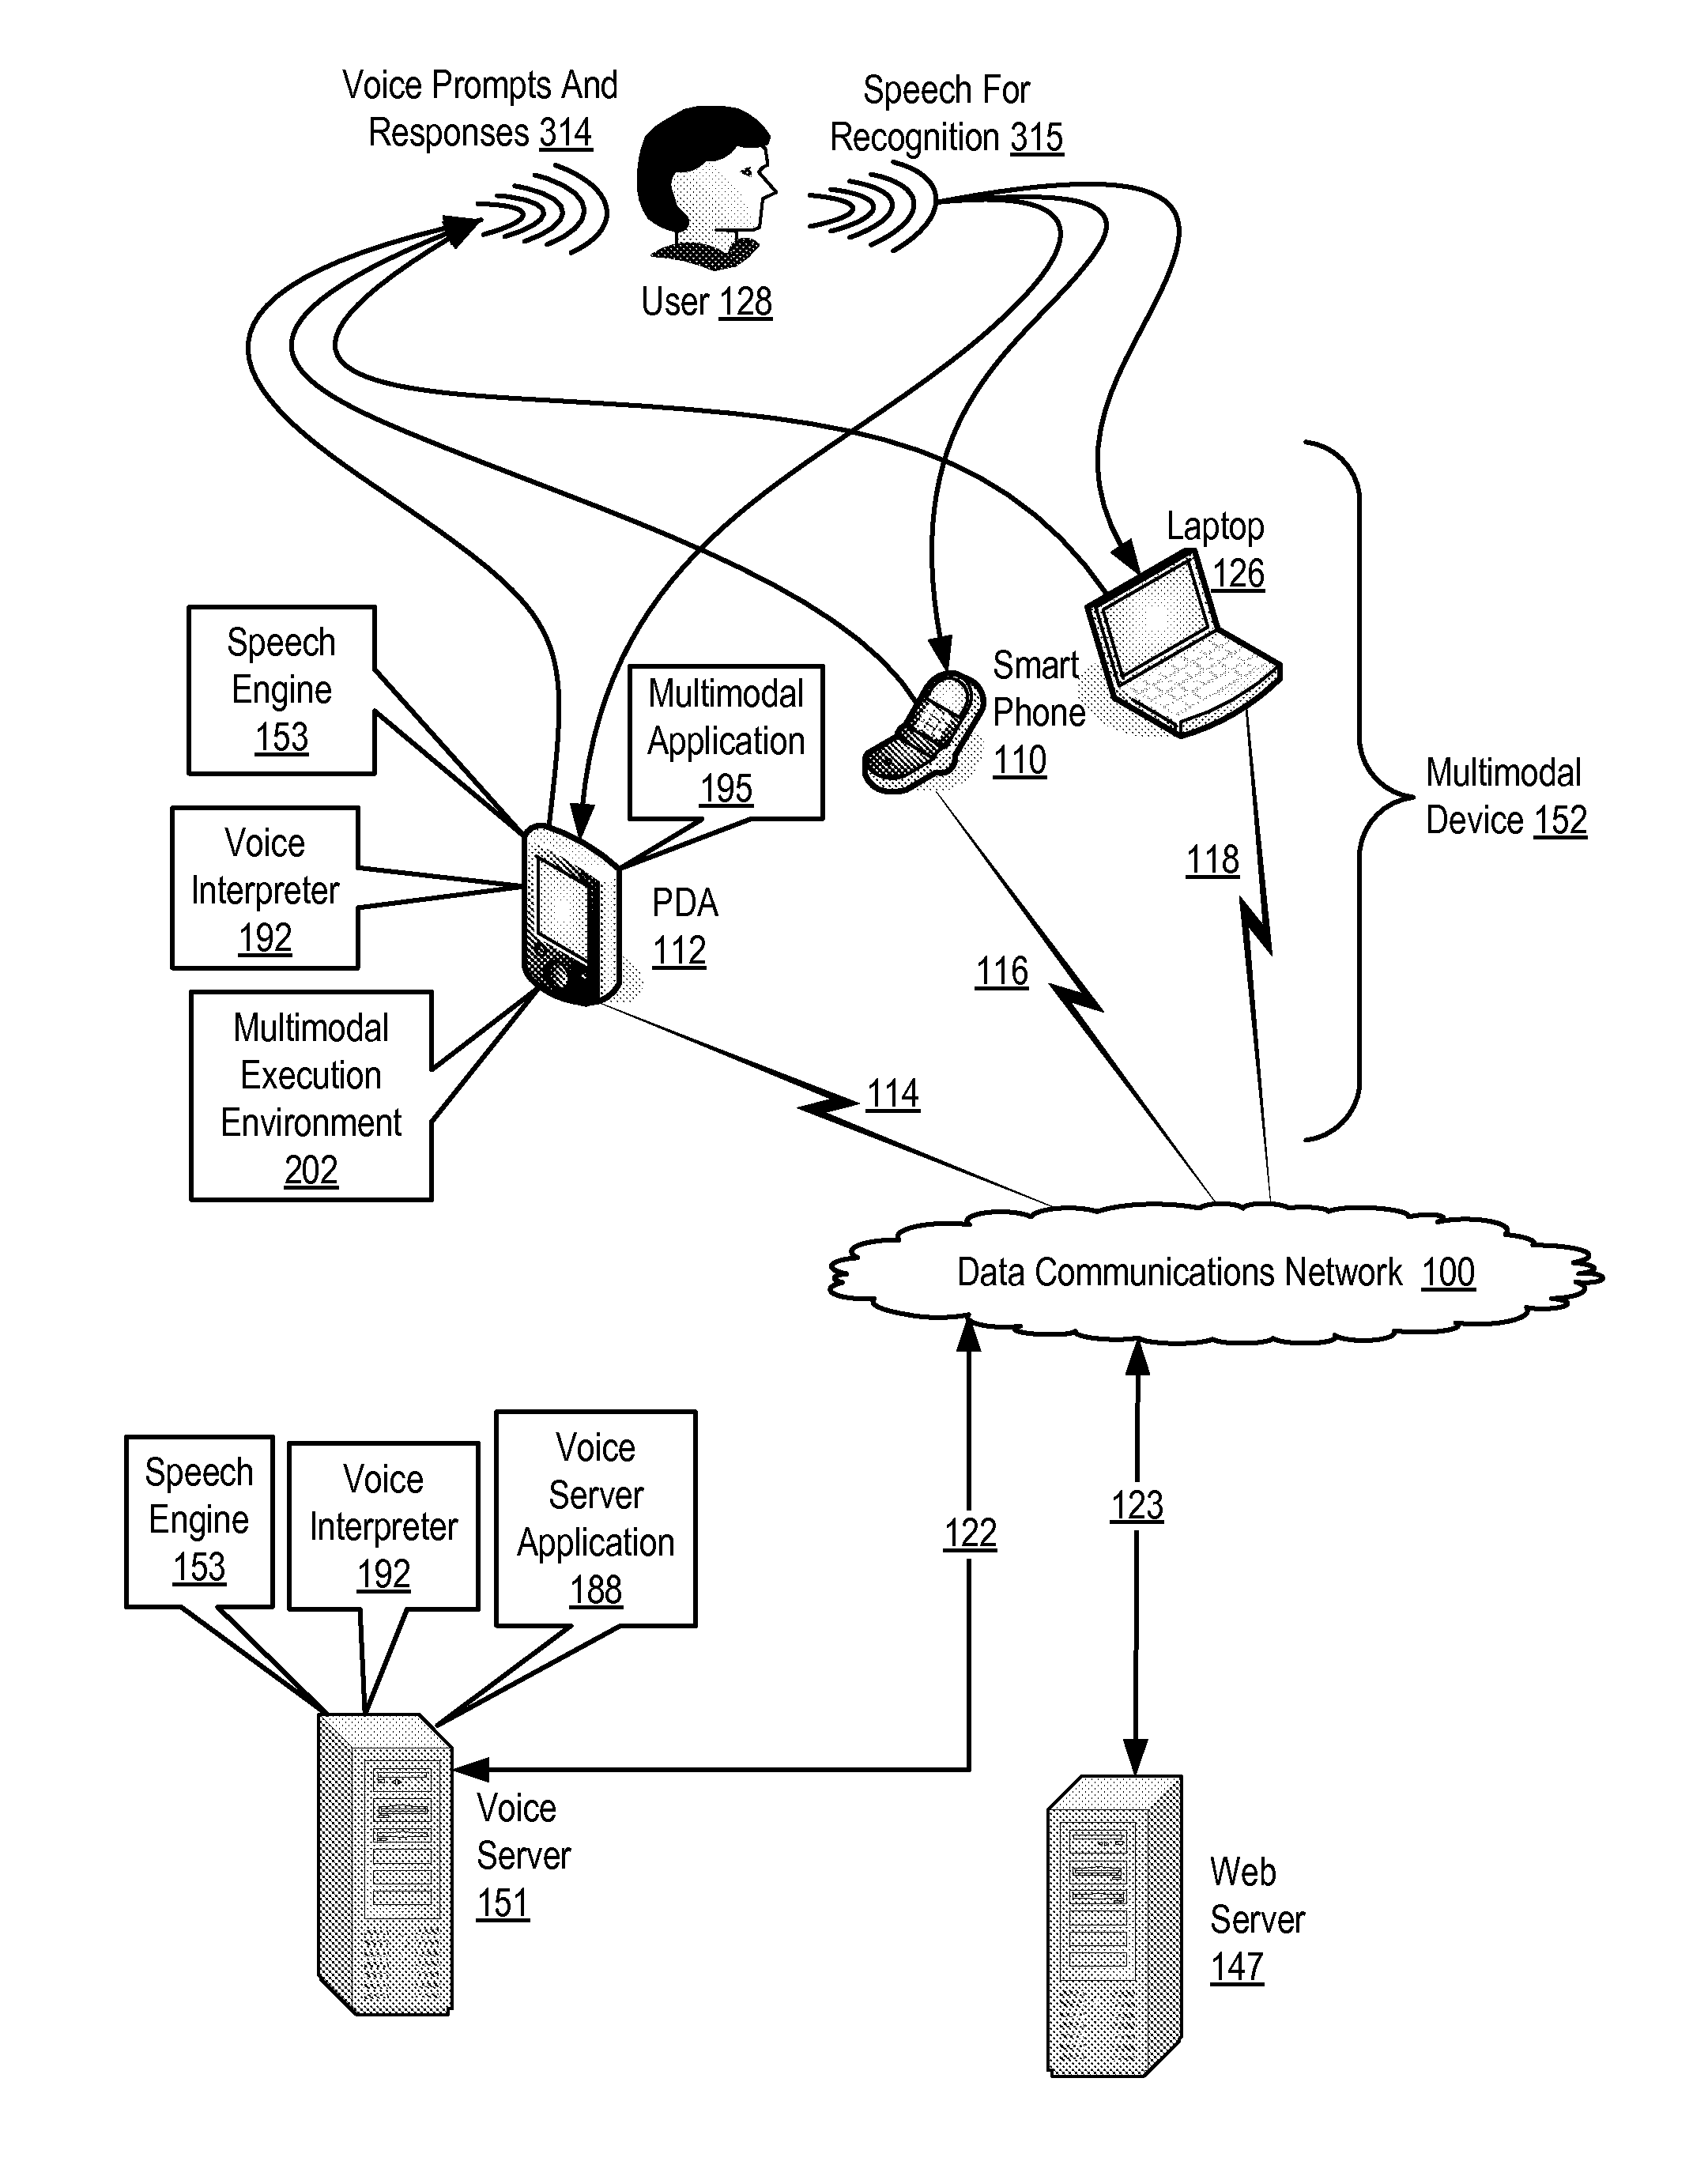 Records Disambiguation In A Multimodal Application Operating On A Multimodal Device